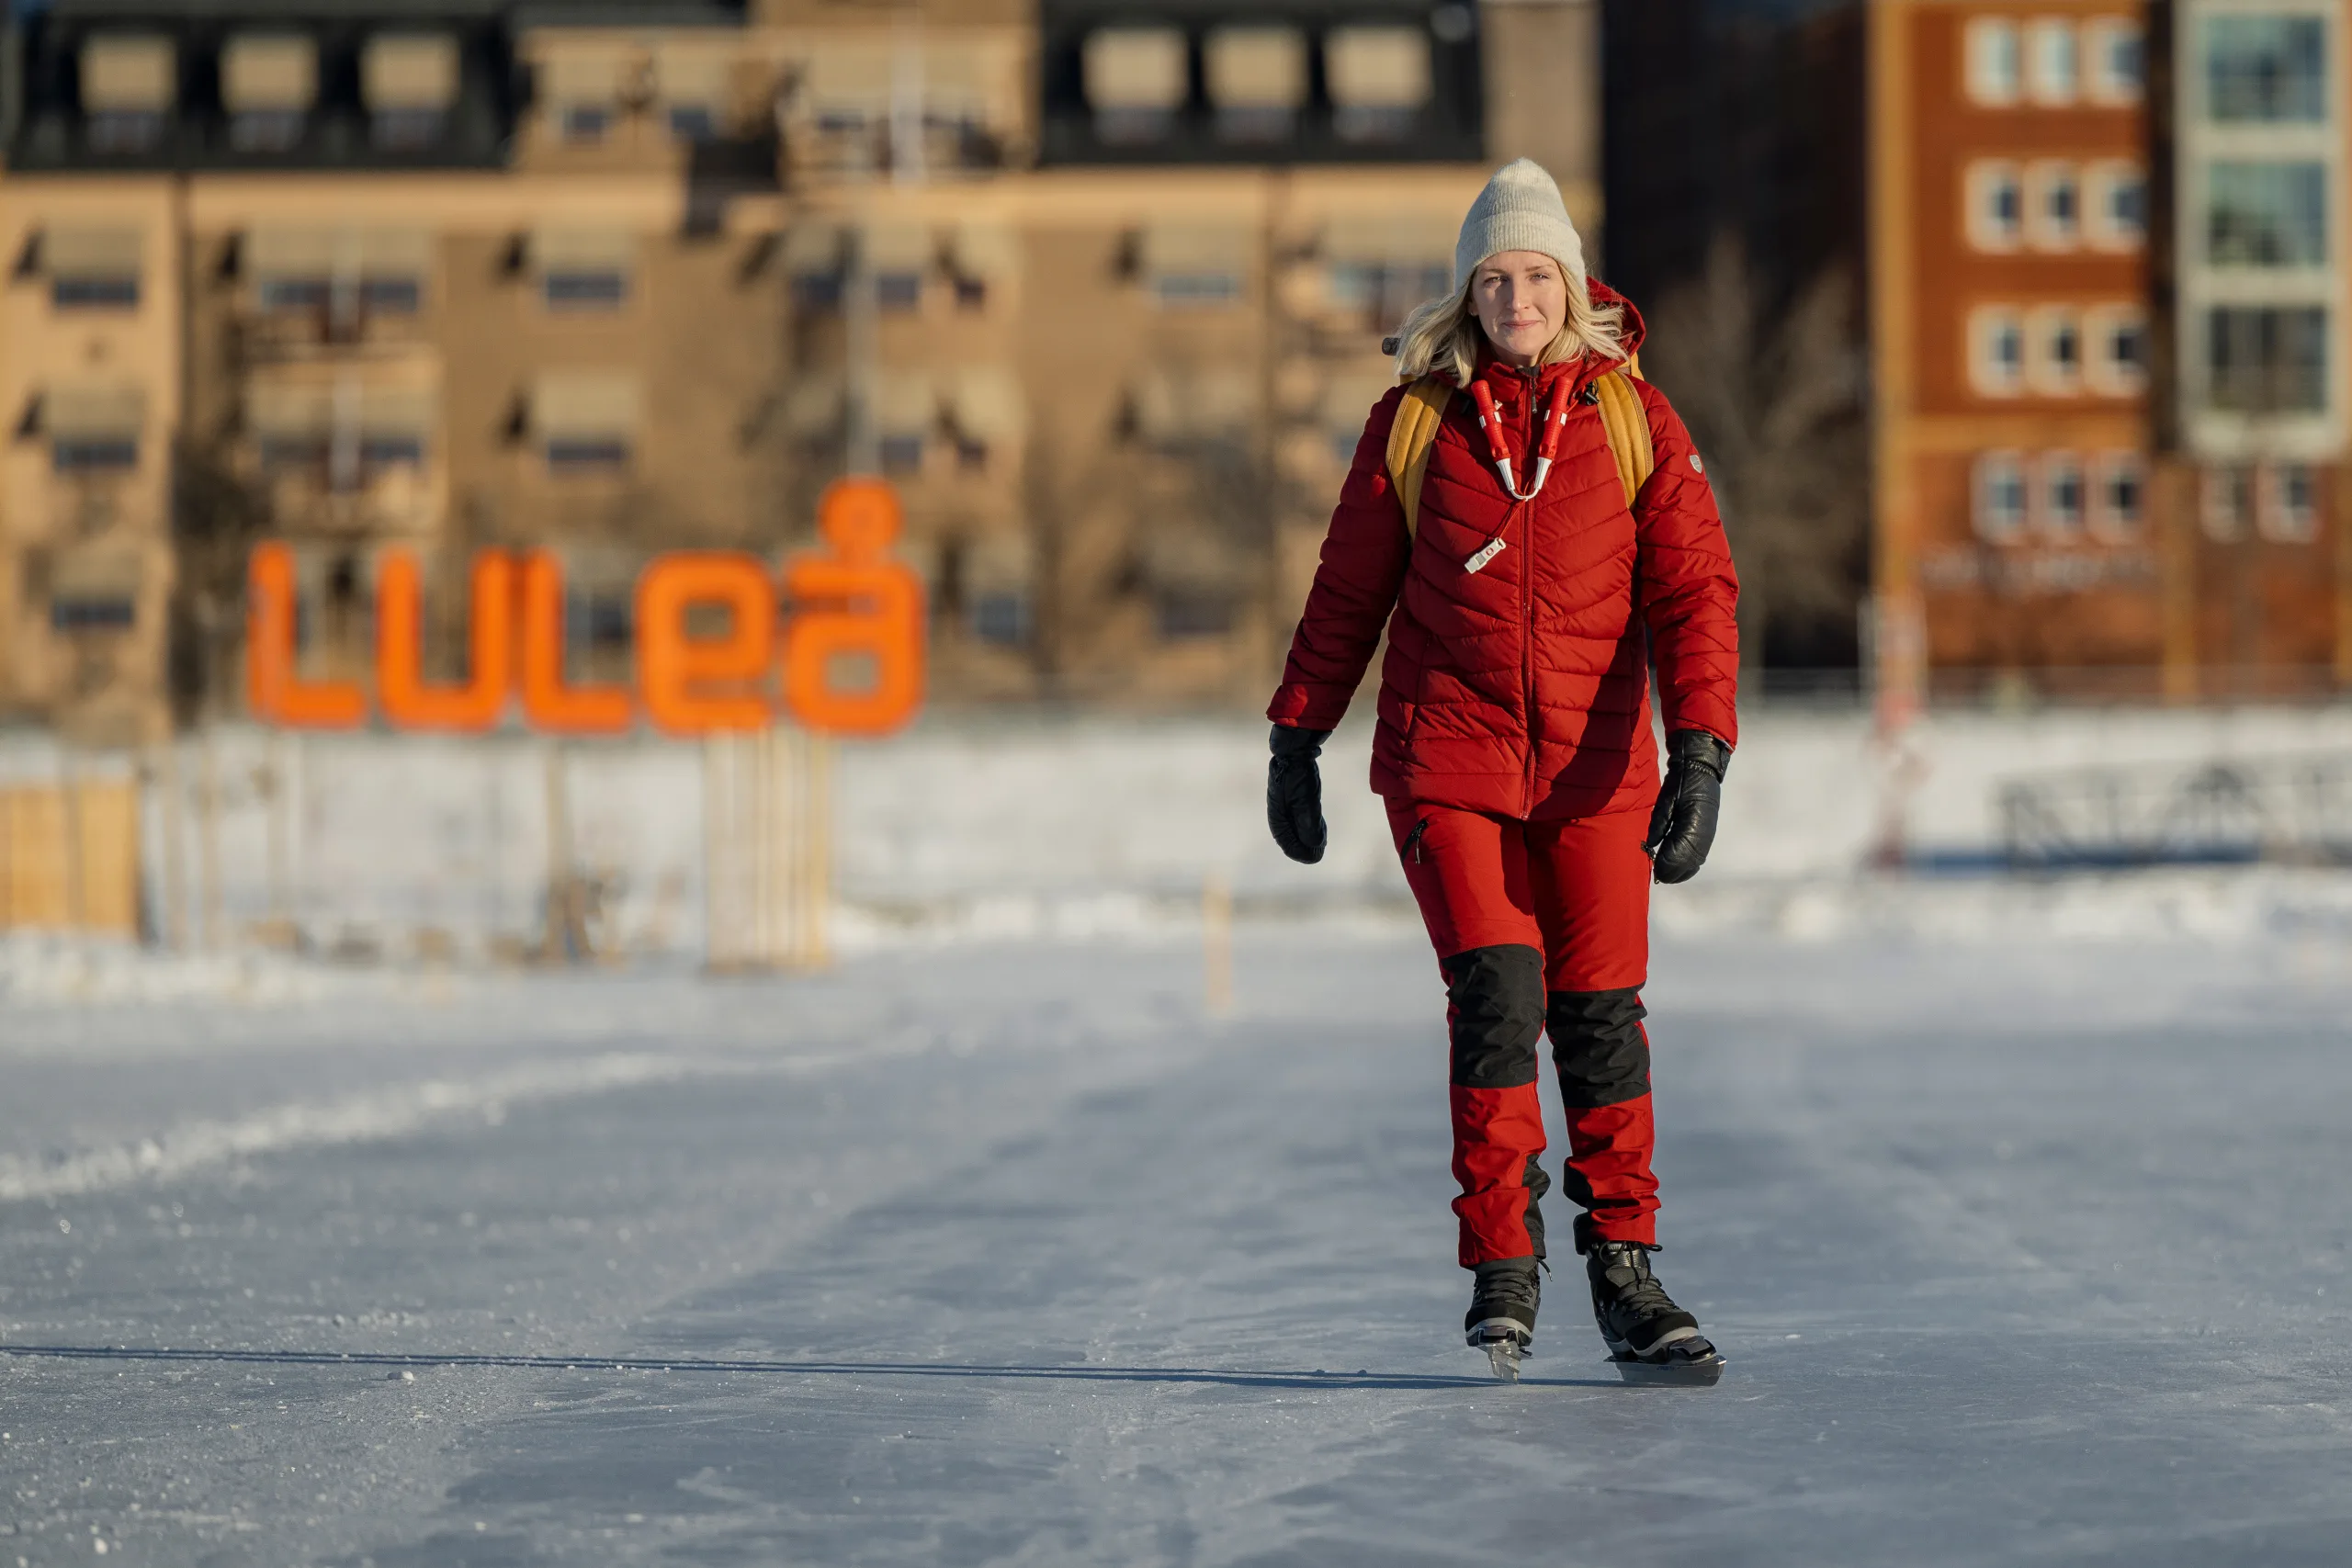 Woman ice skating, with Luleå sign in background.